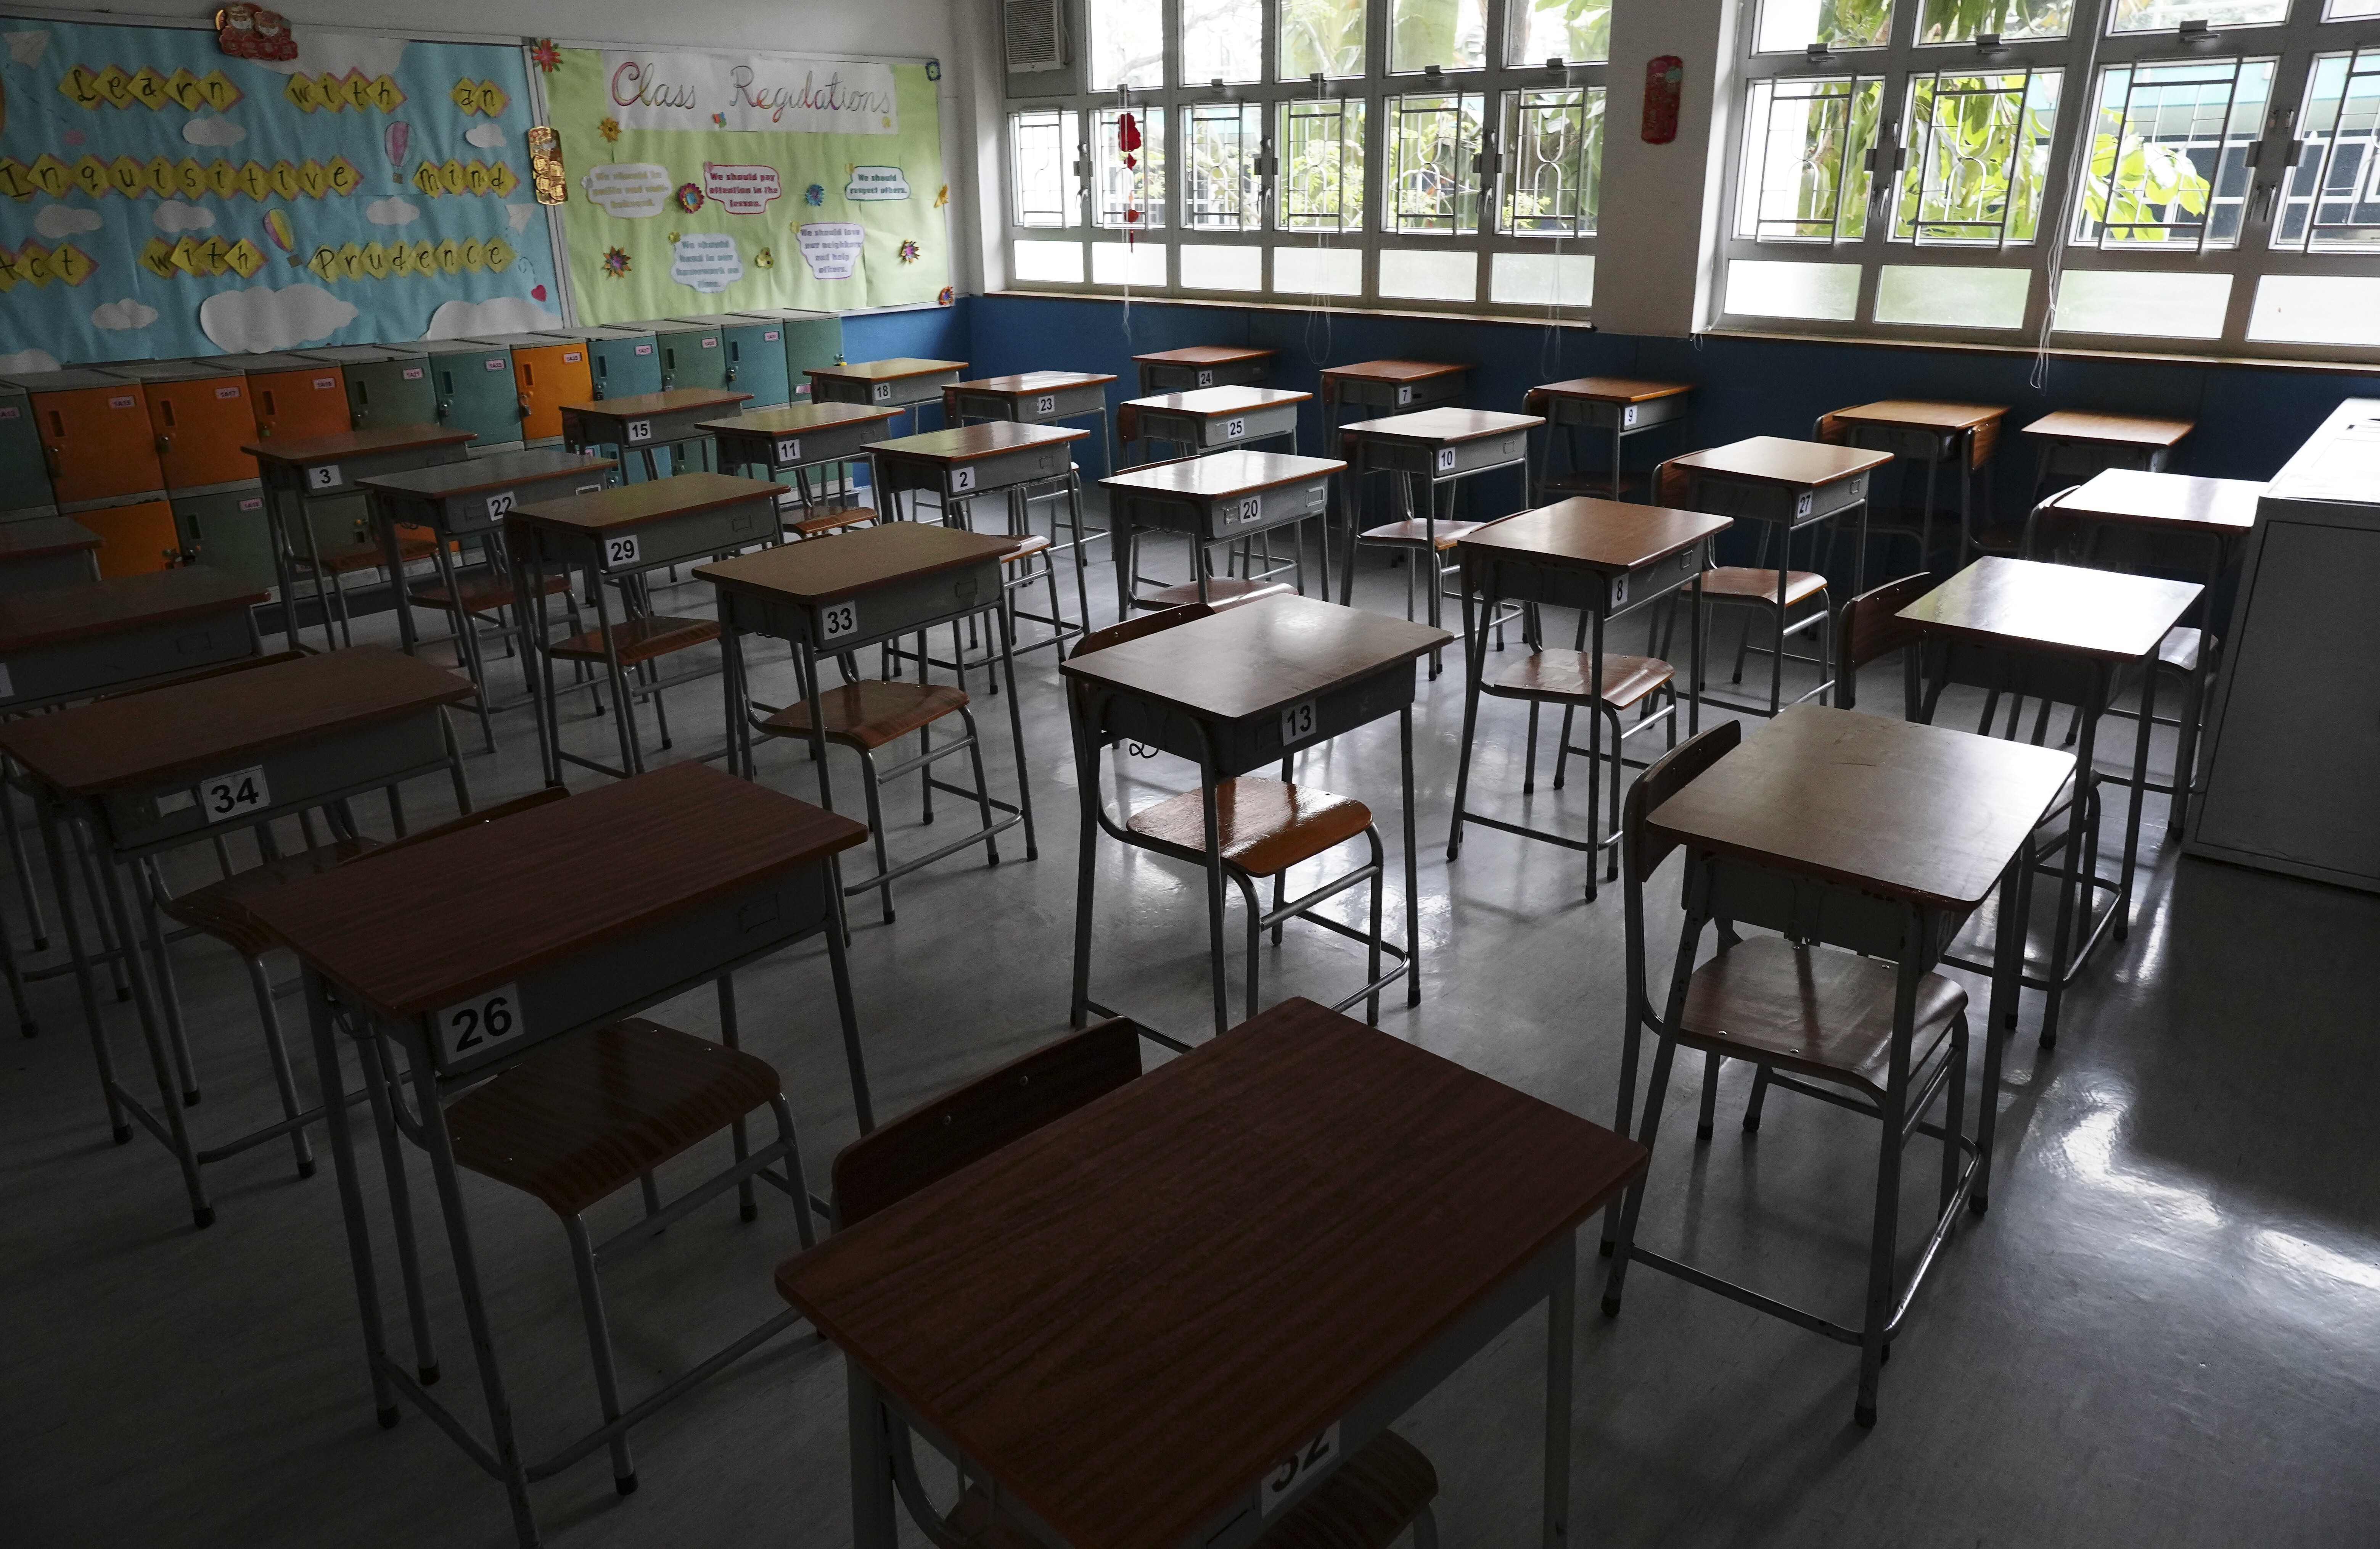 Sadly, school can be a tough place for teachers as well as students. Photo: SCMP / Robert Ng